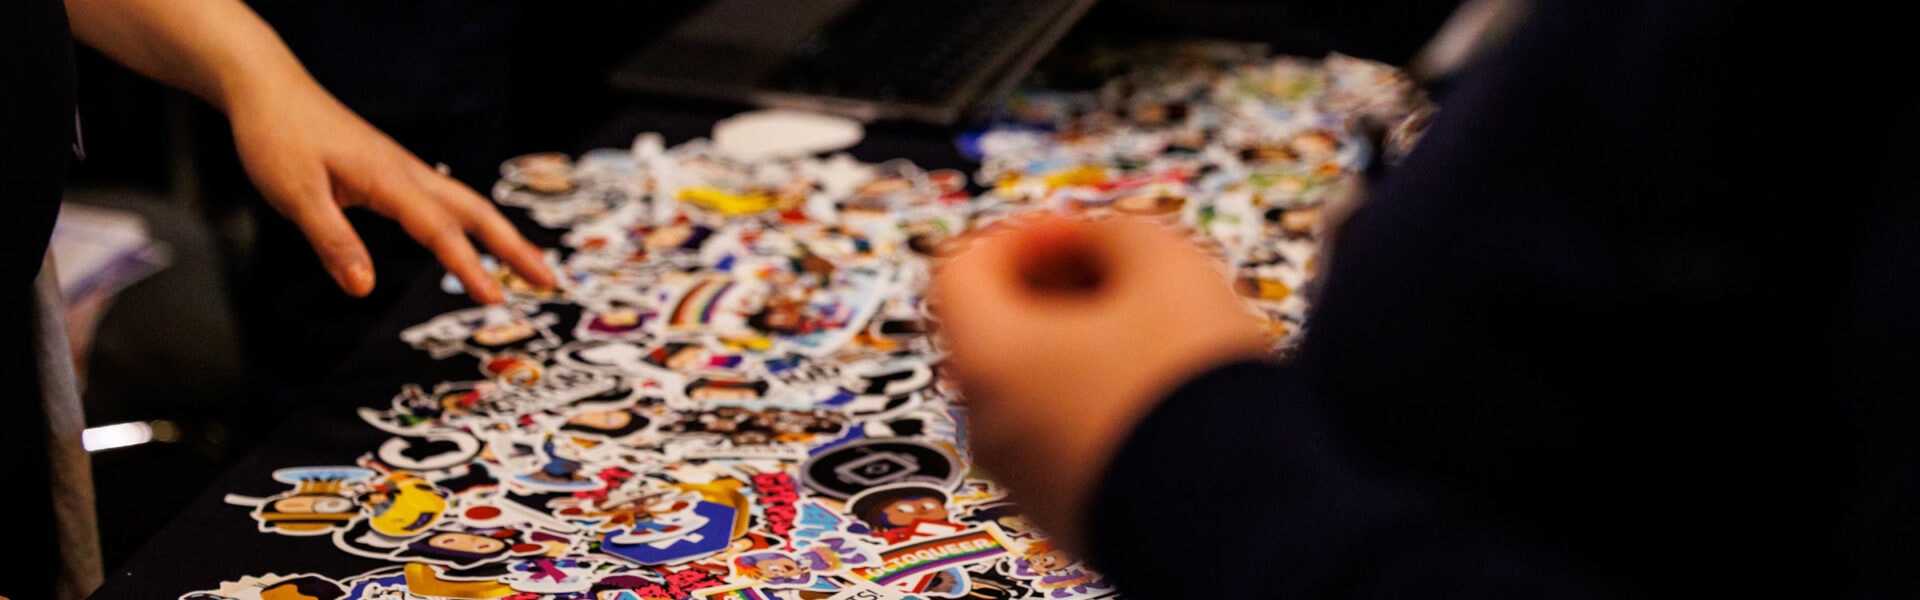 A pile of colorful stickers spread out on a table.